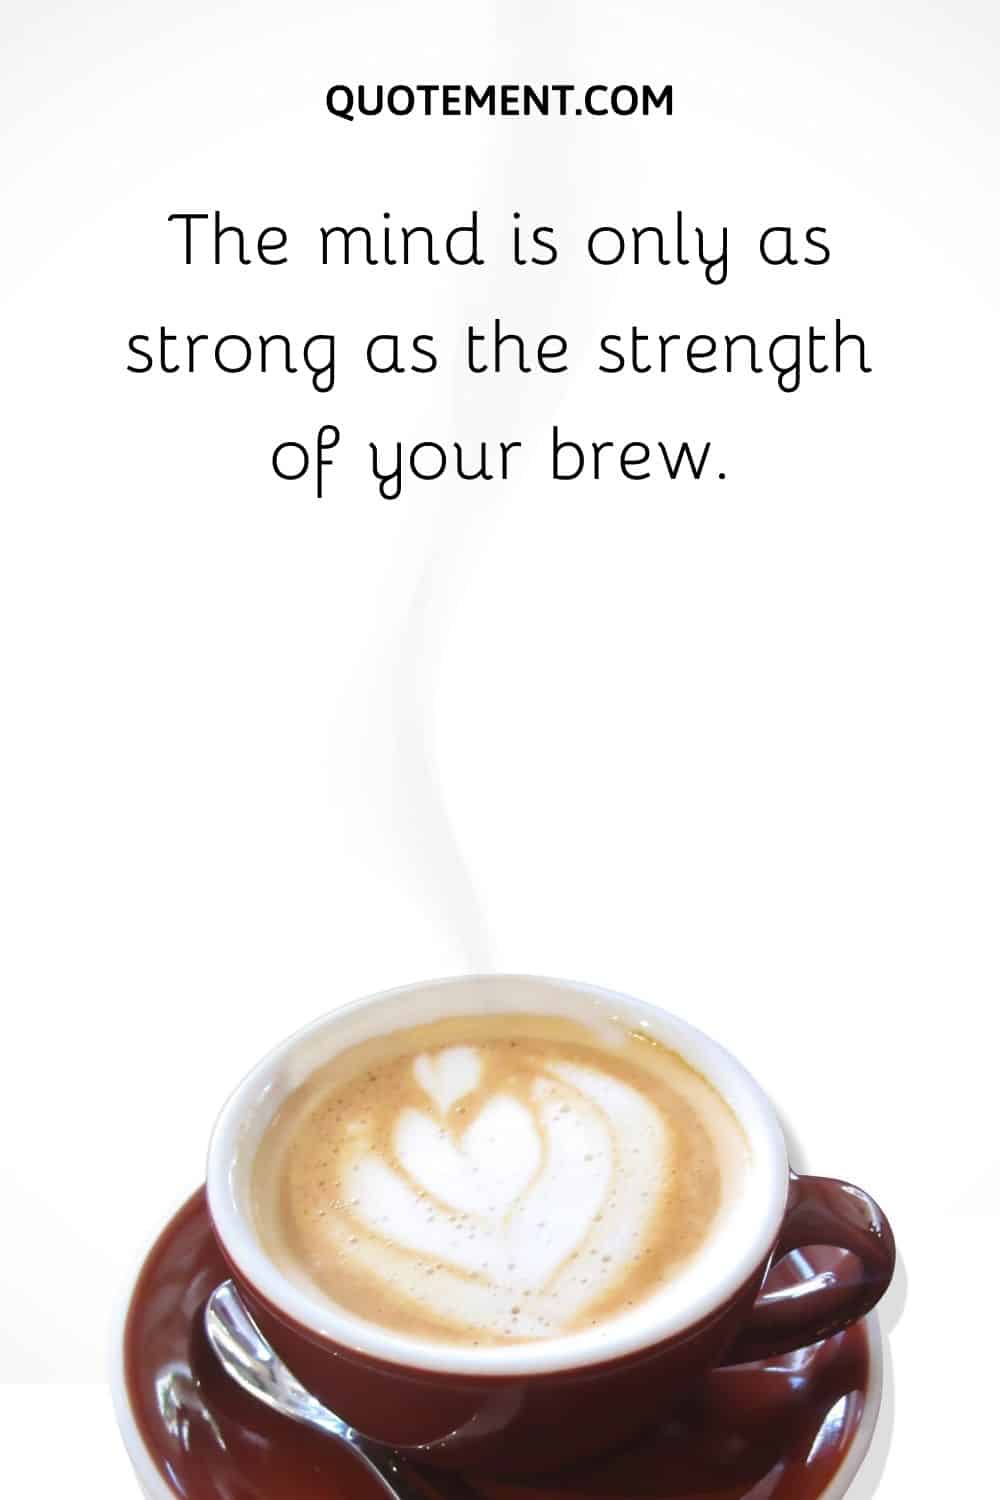 The mind is only as strong as the strength of your brew